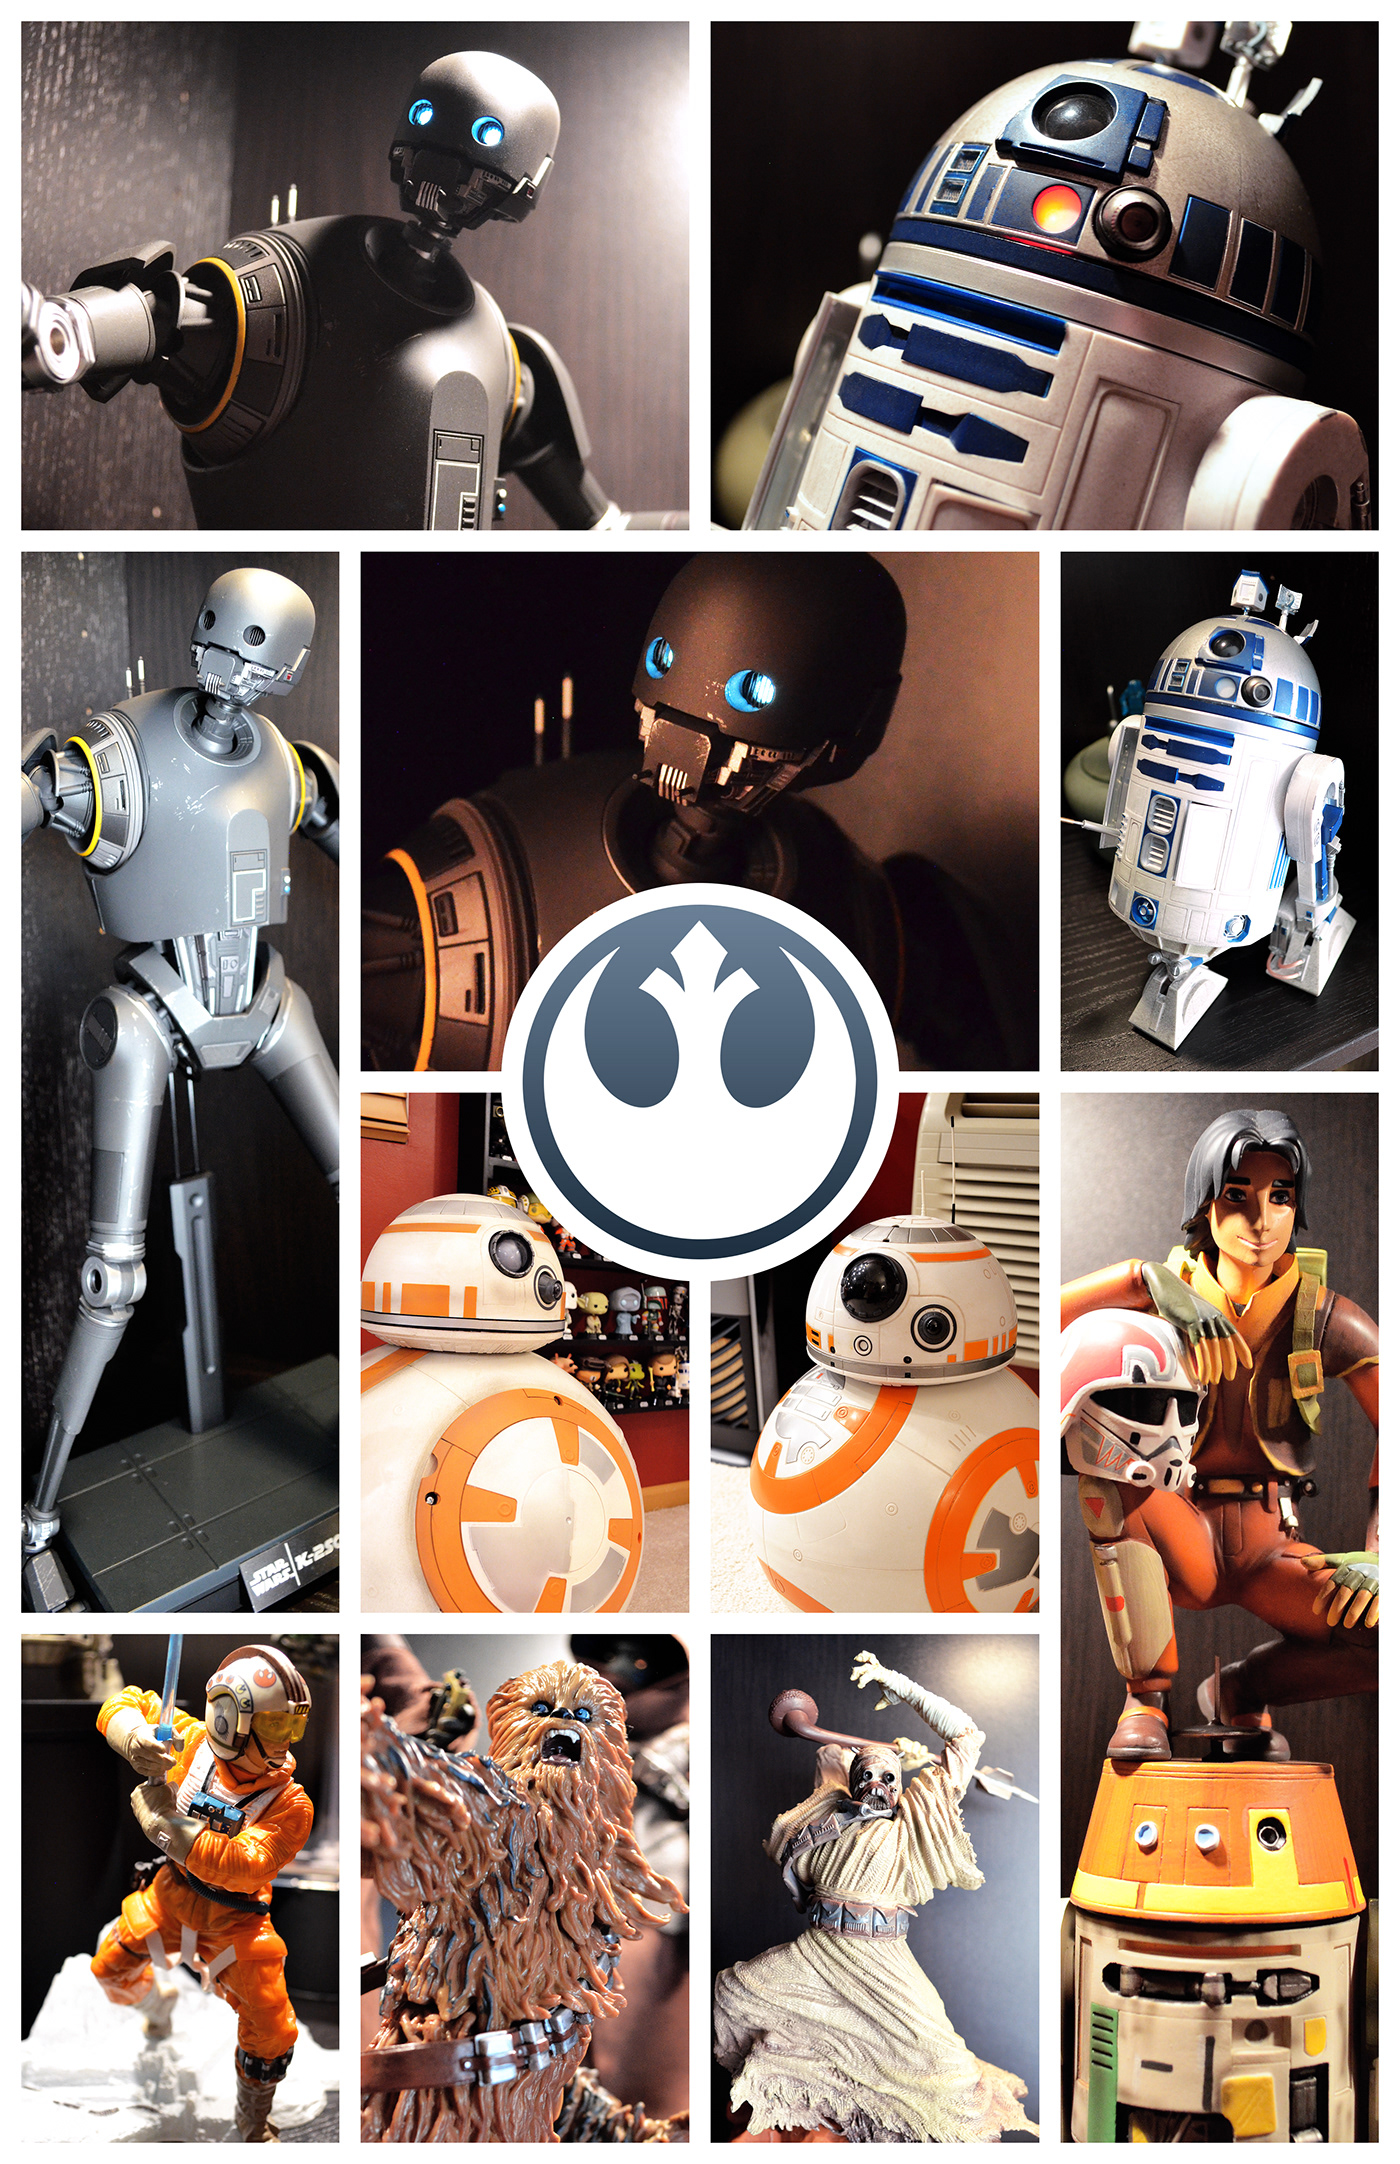 star wars Star wars collection guitars Photography  Sideshow Collectibles collectibles